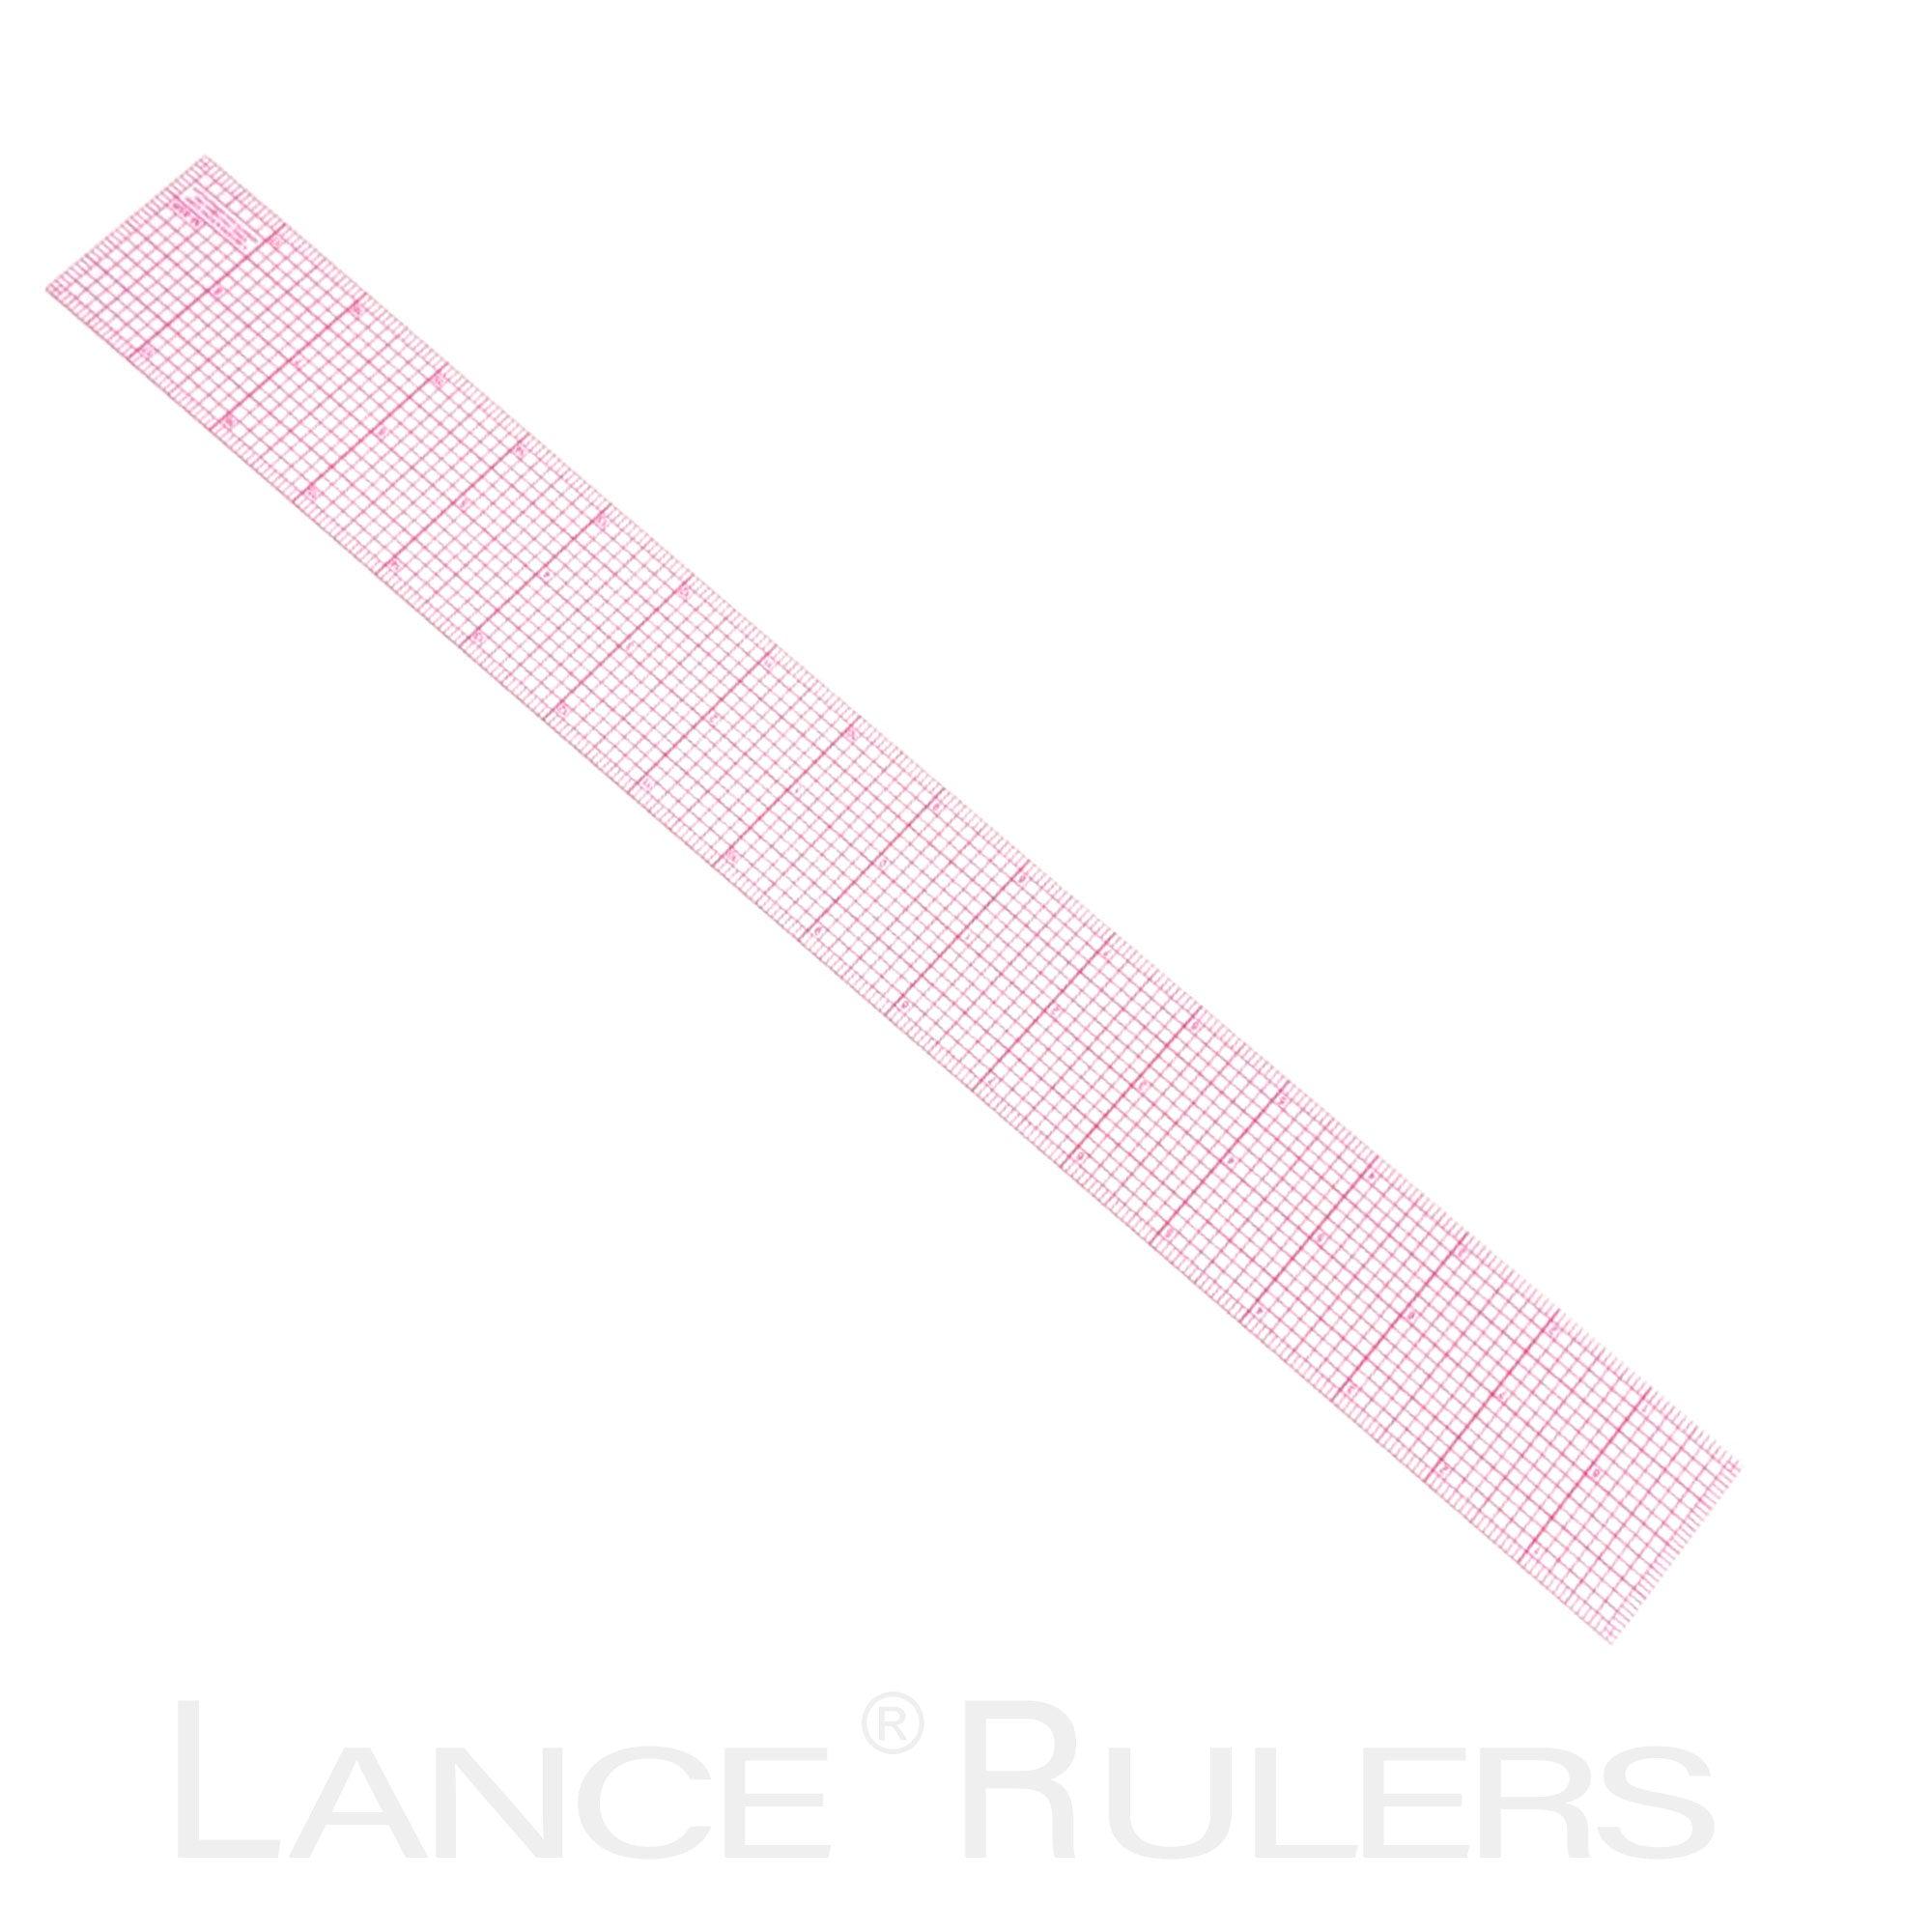 LANCE 2 X 18 GRAPHIC RULER RED – Lance Rulers - Precision